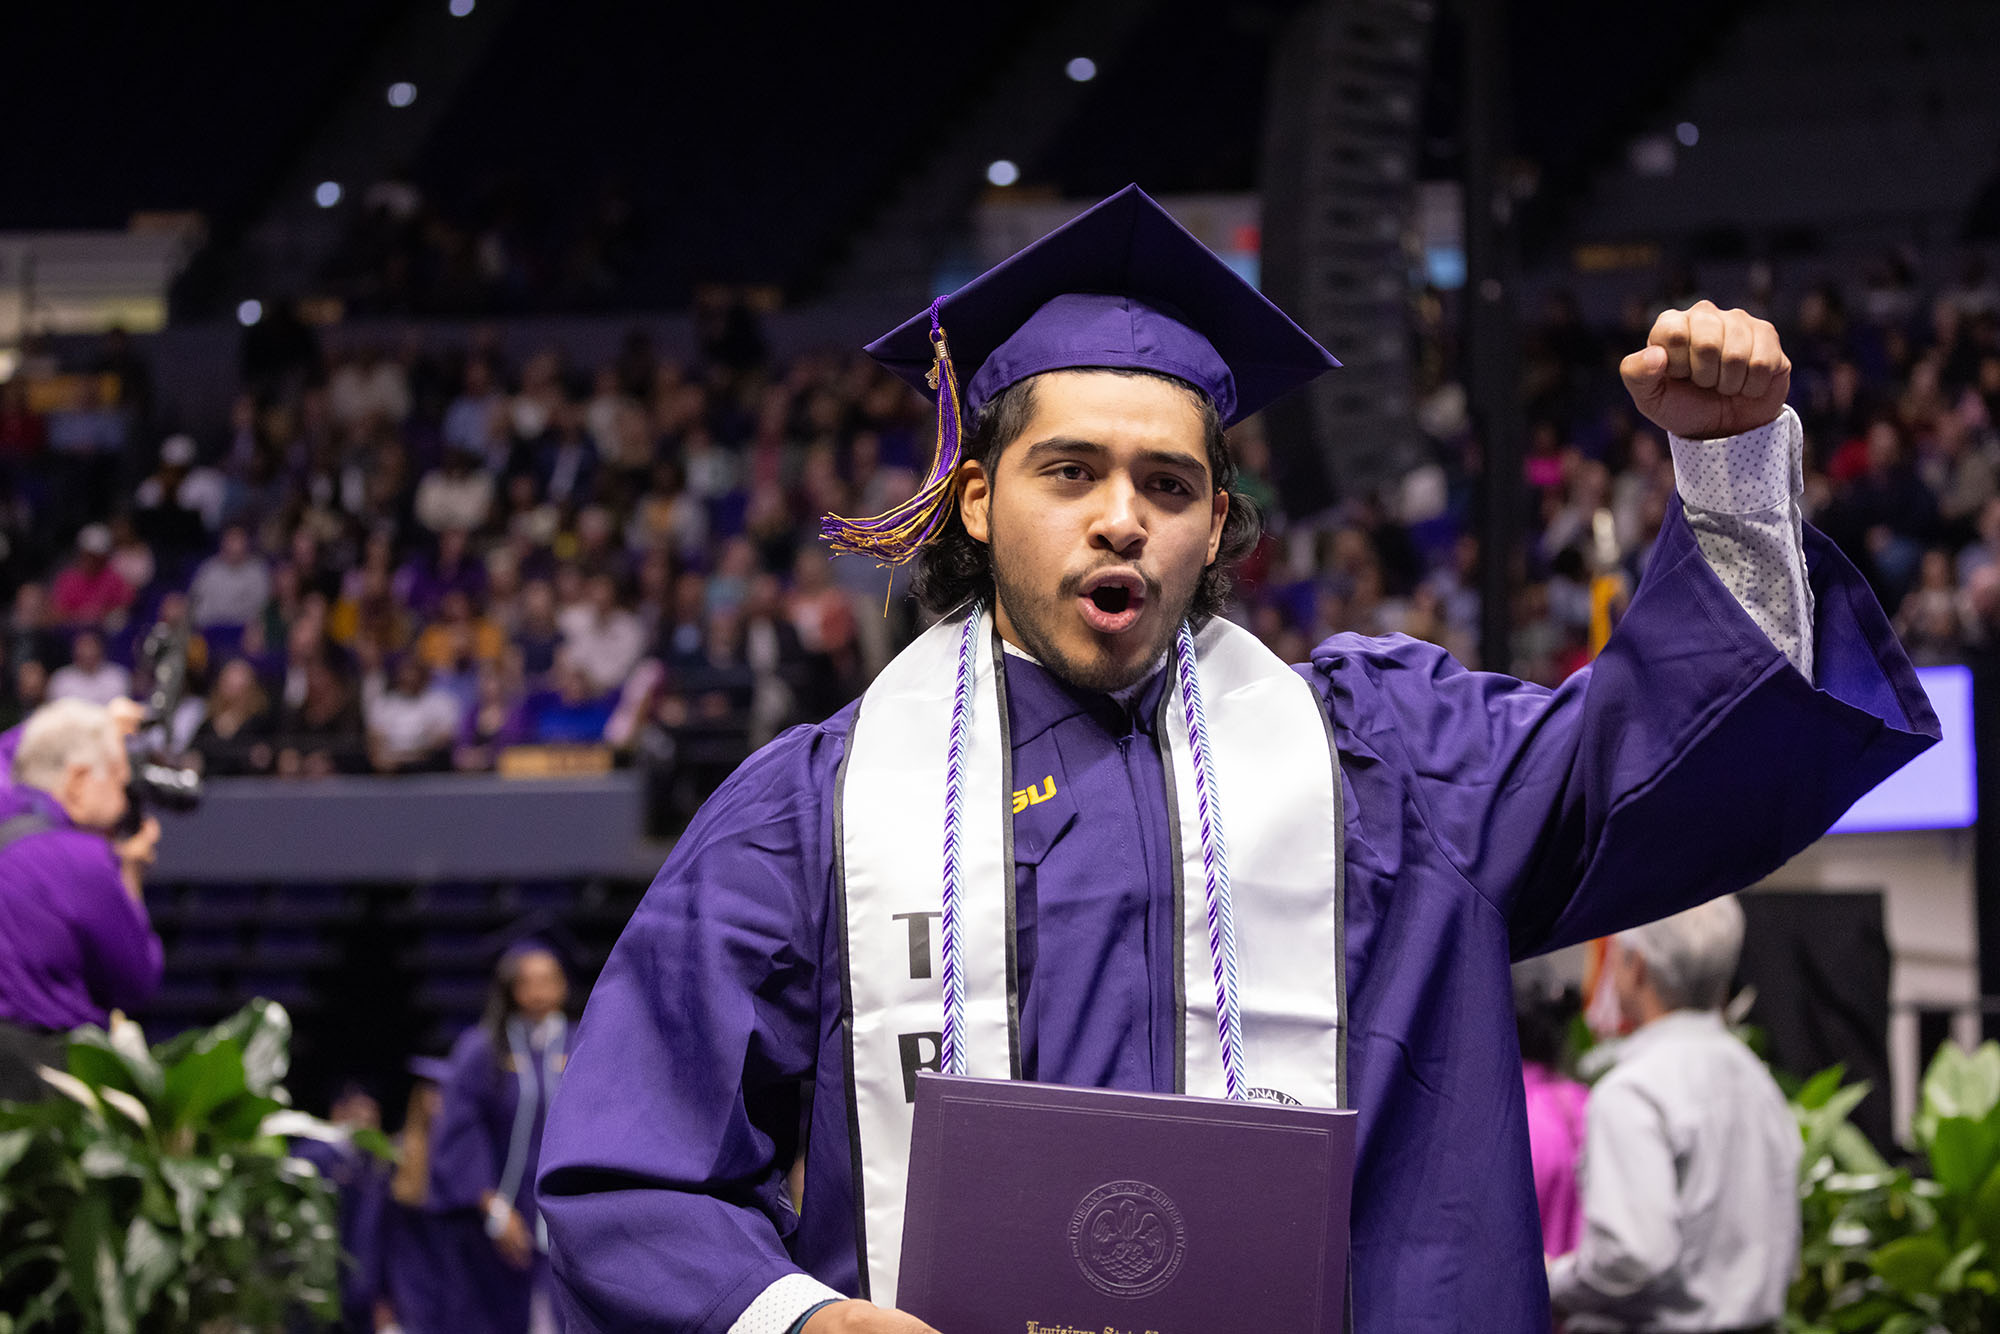 Student celebrates during commencement ceremony